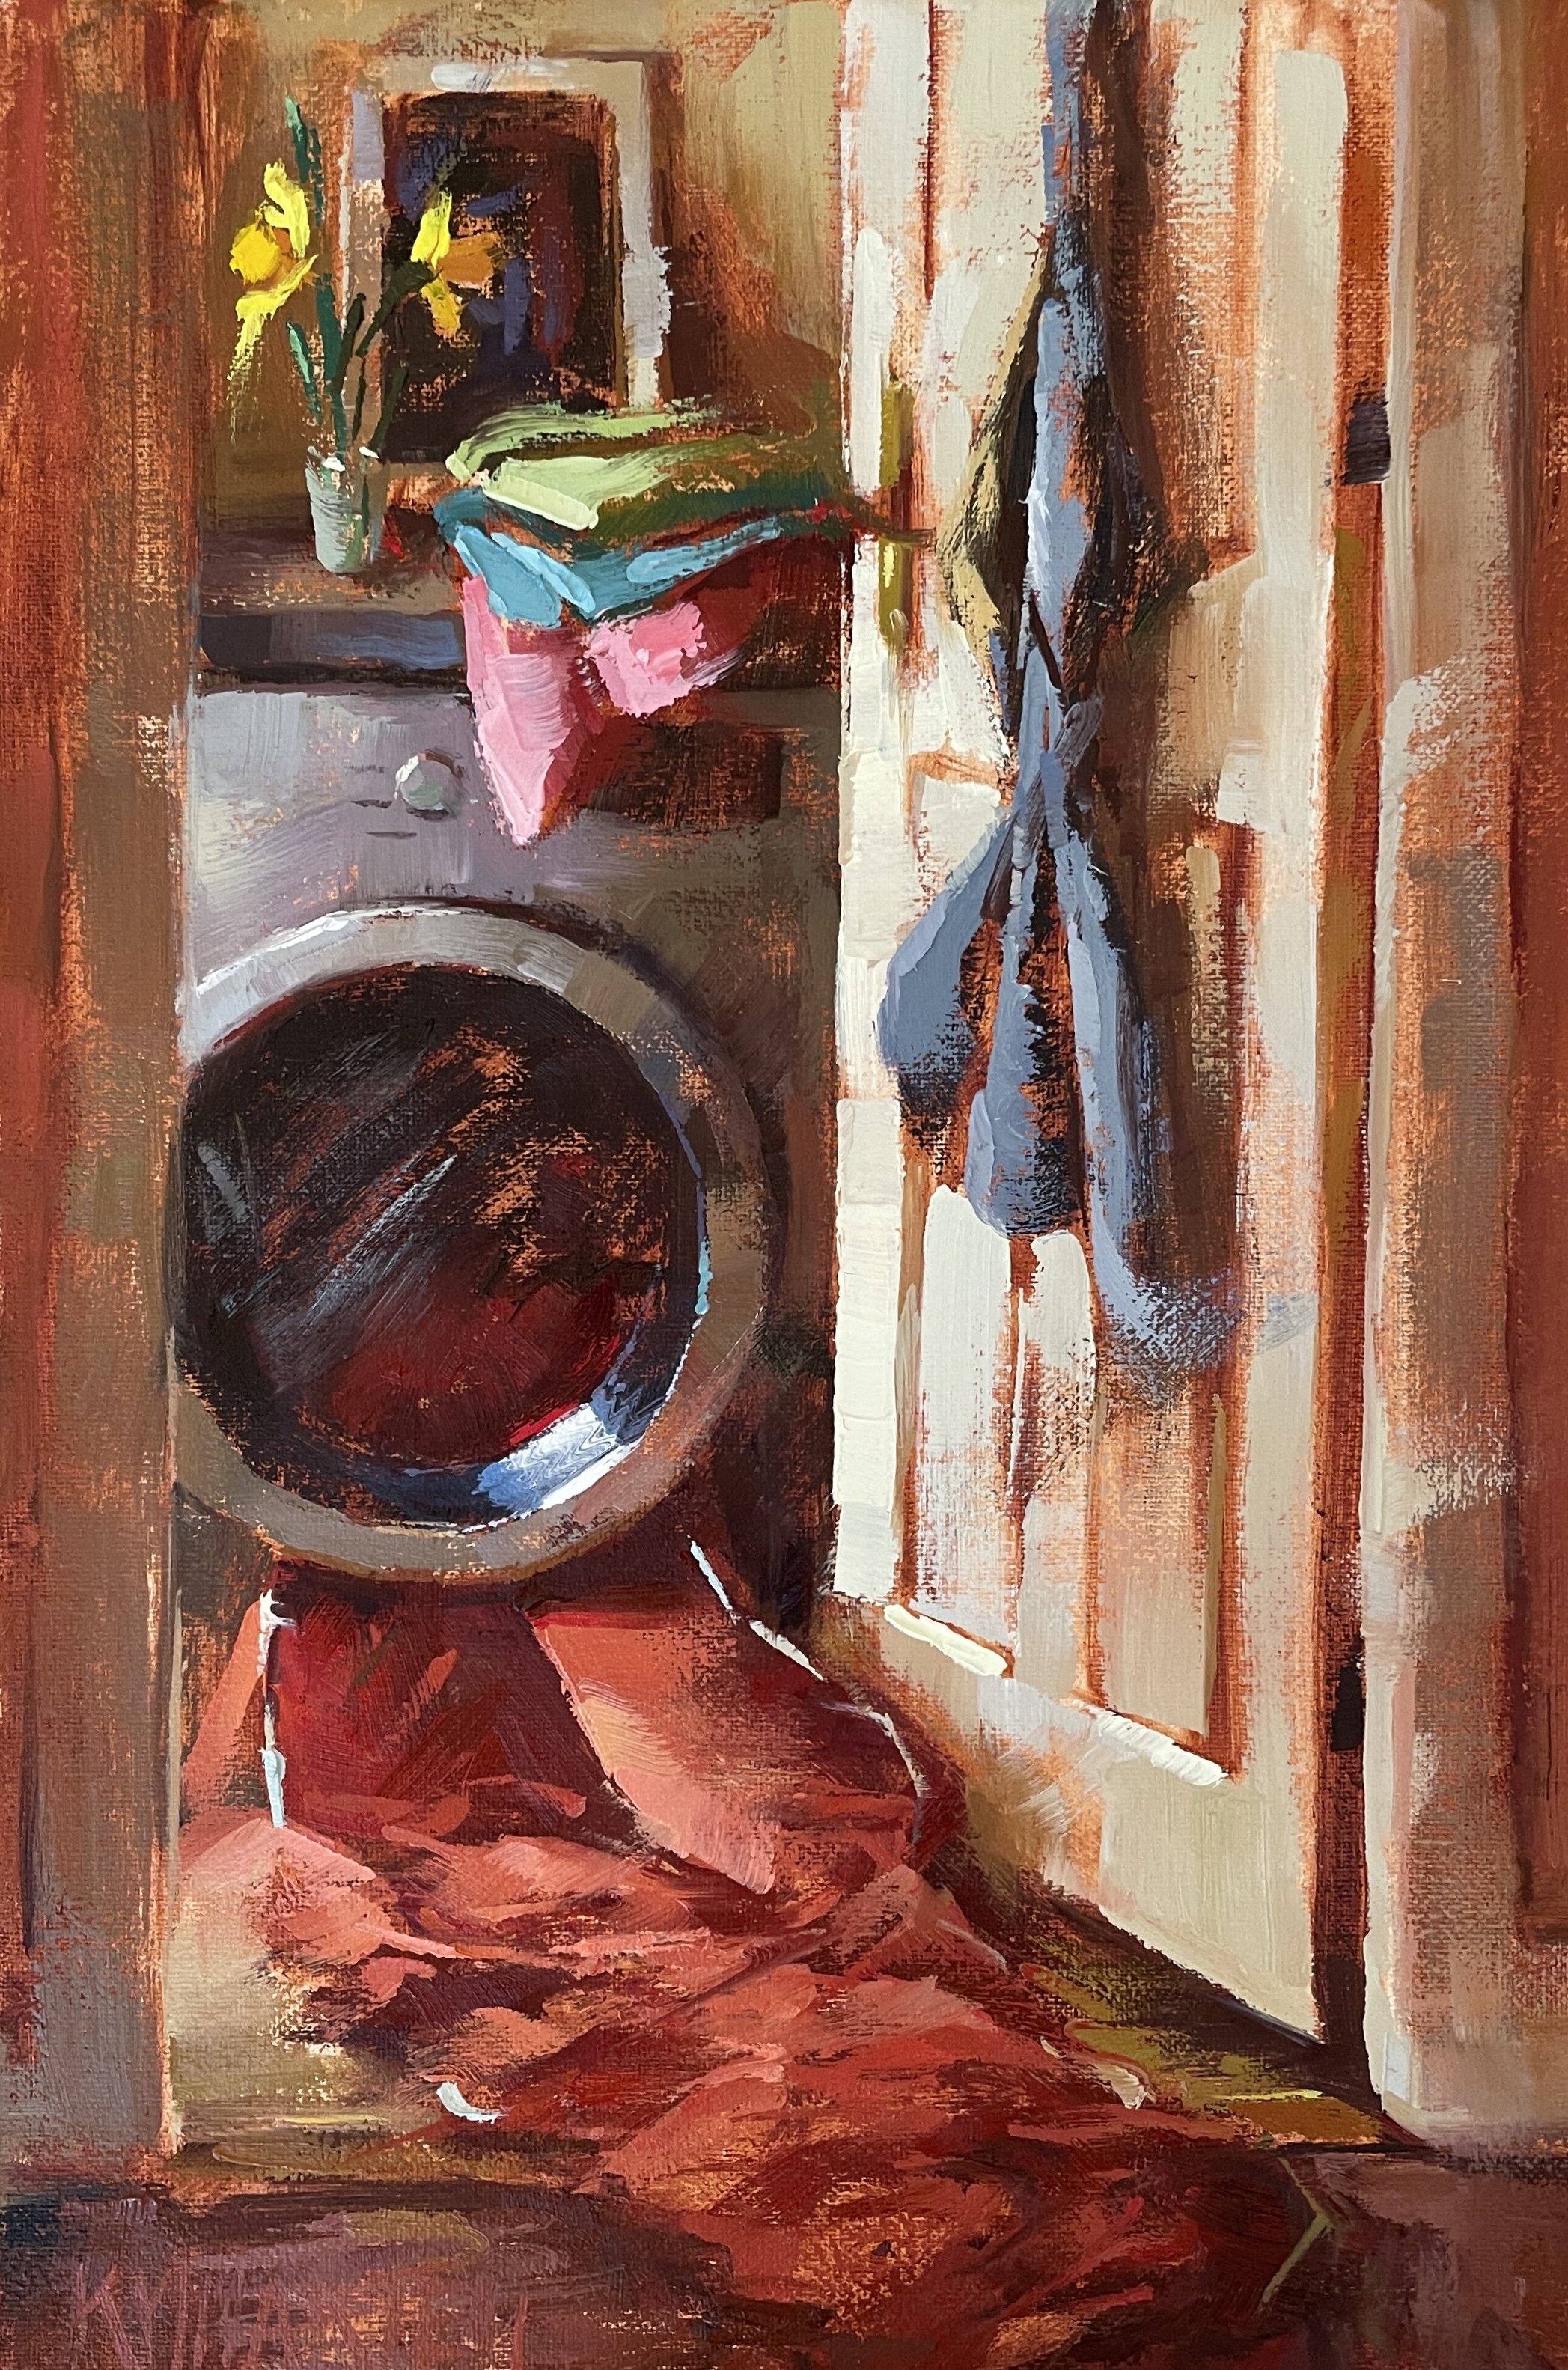 Laundry at Noon - 20x30cm - oil on canvas - kmmartell - 470 euro.JPG